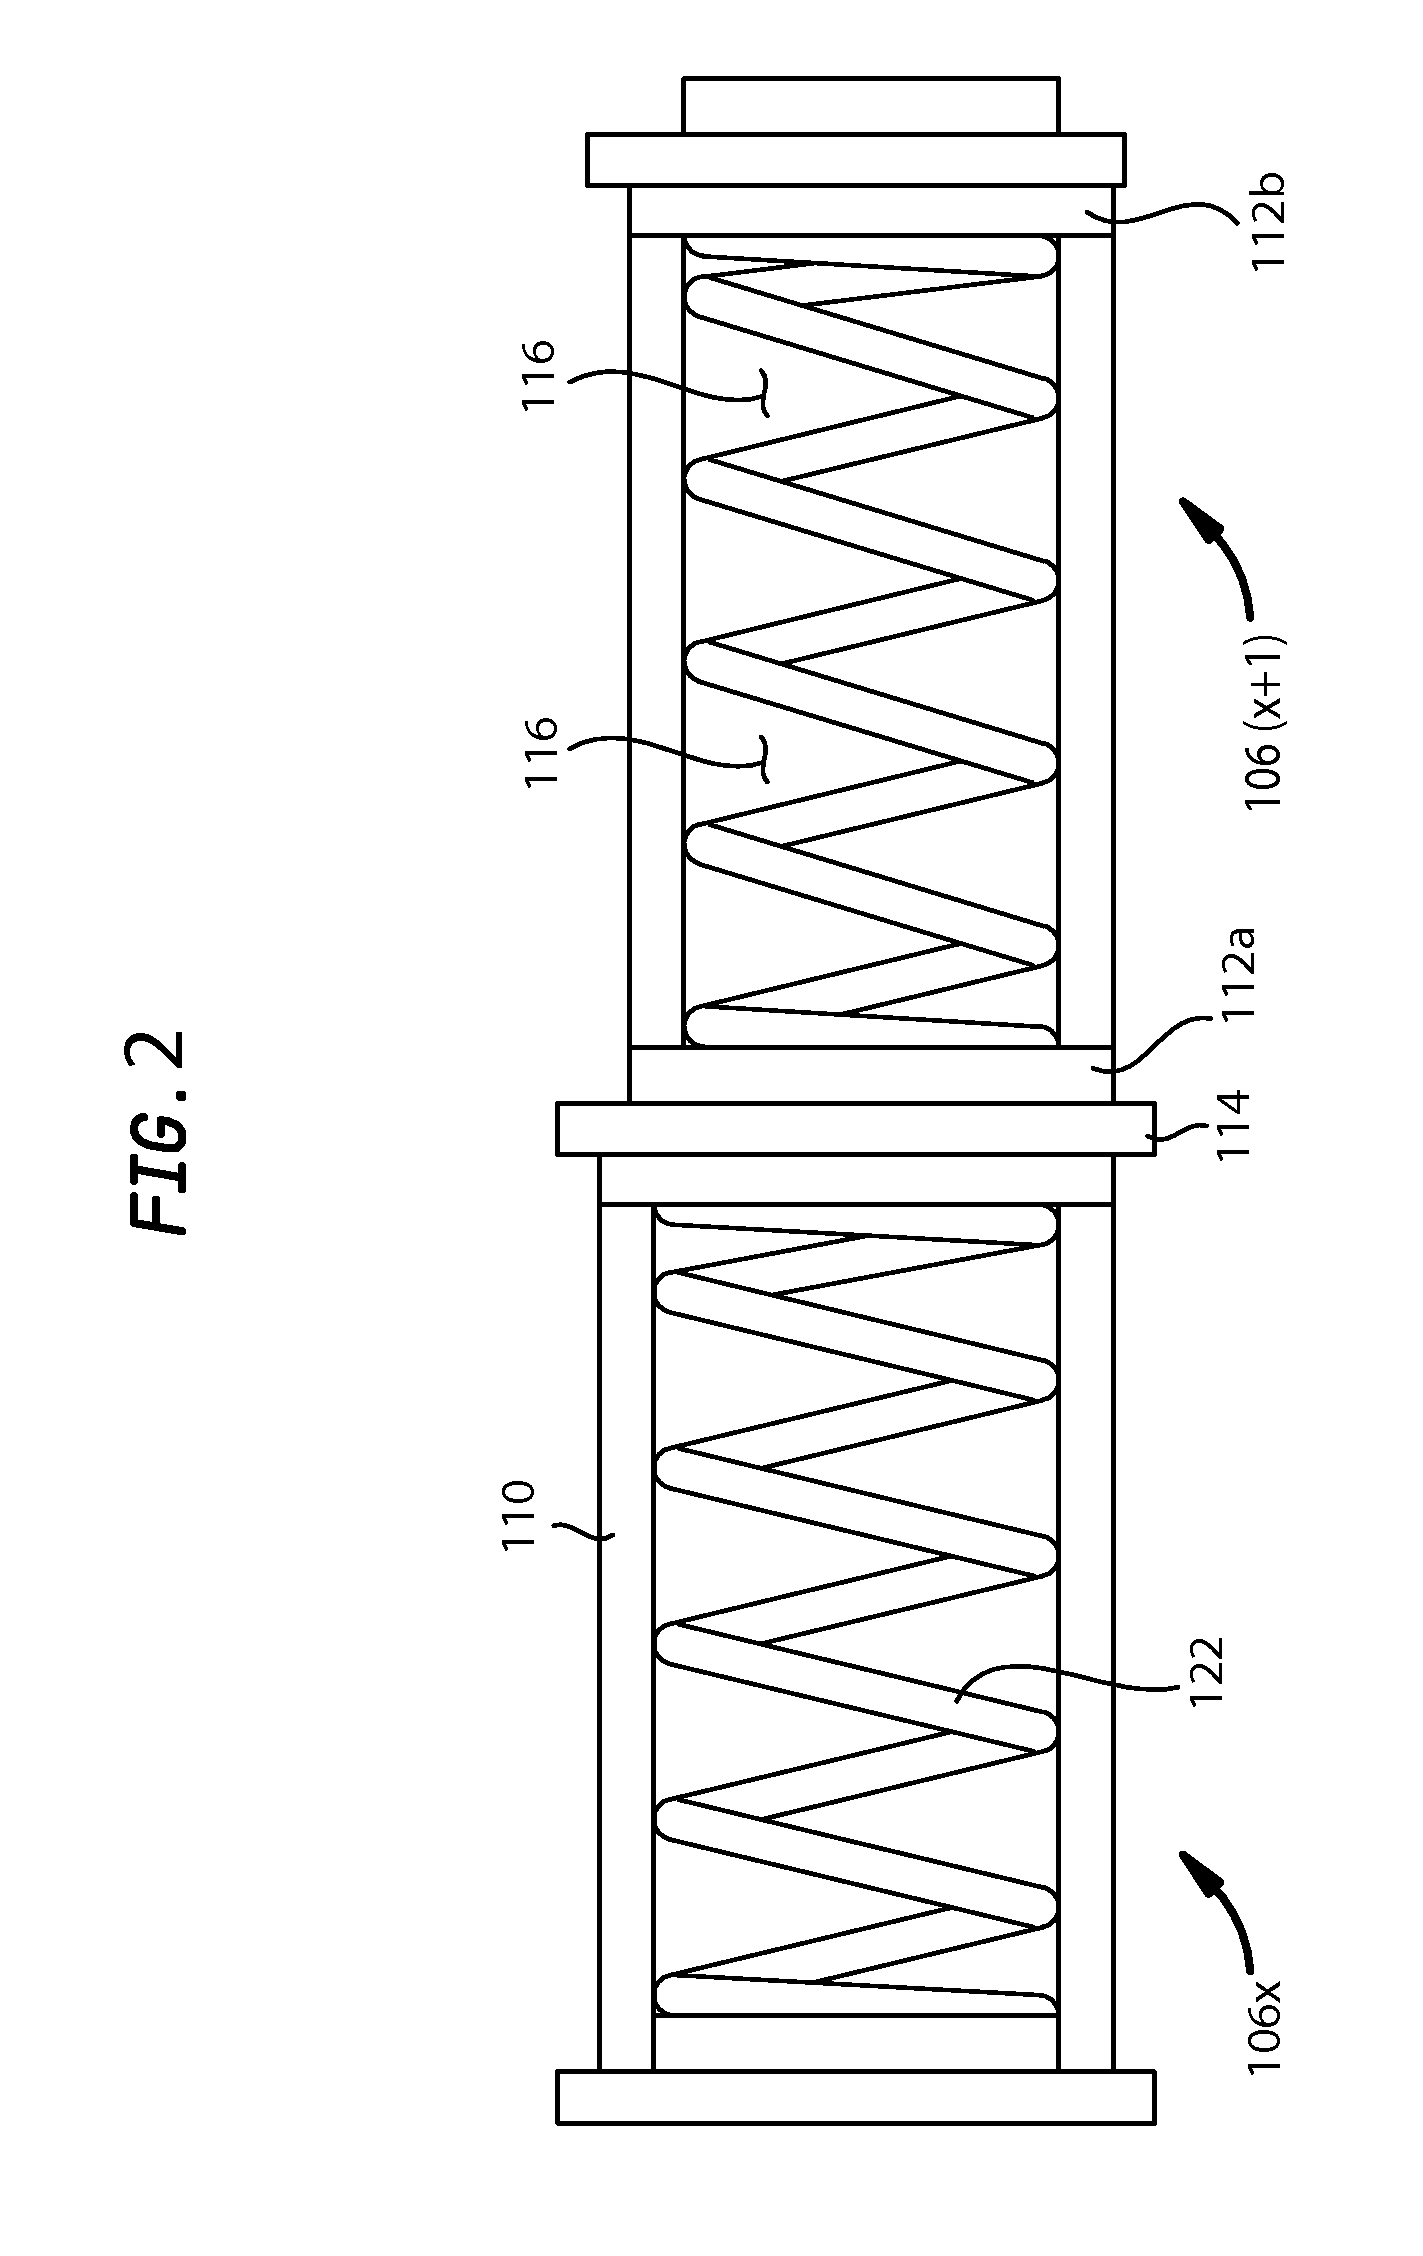 Continuum style manipulator actuated with phase change media